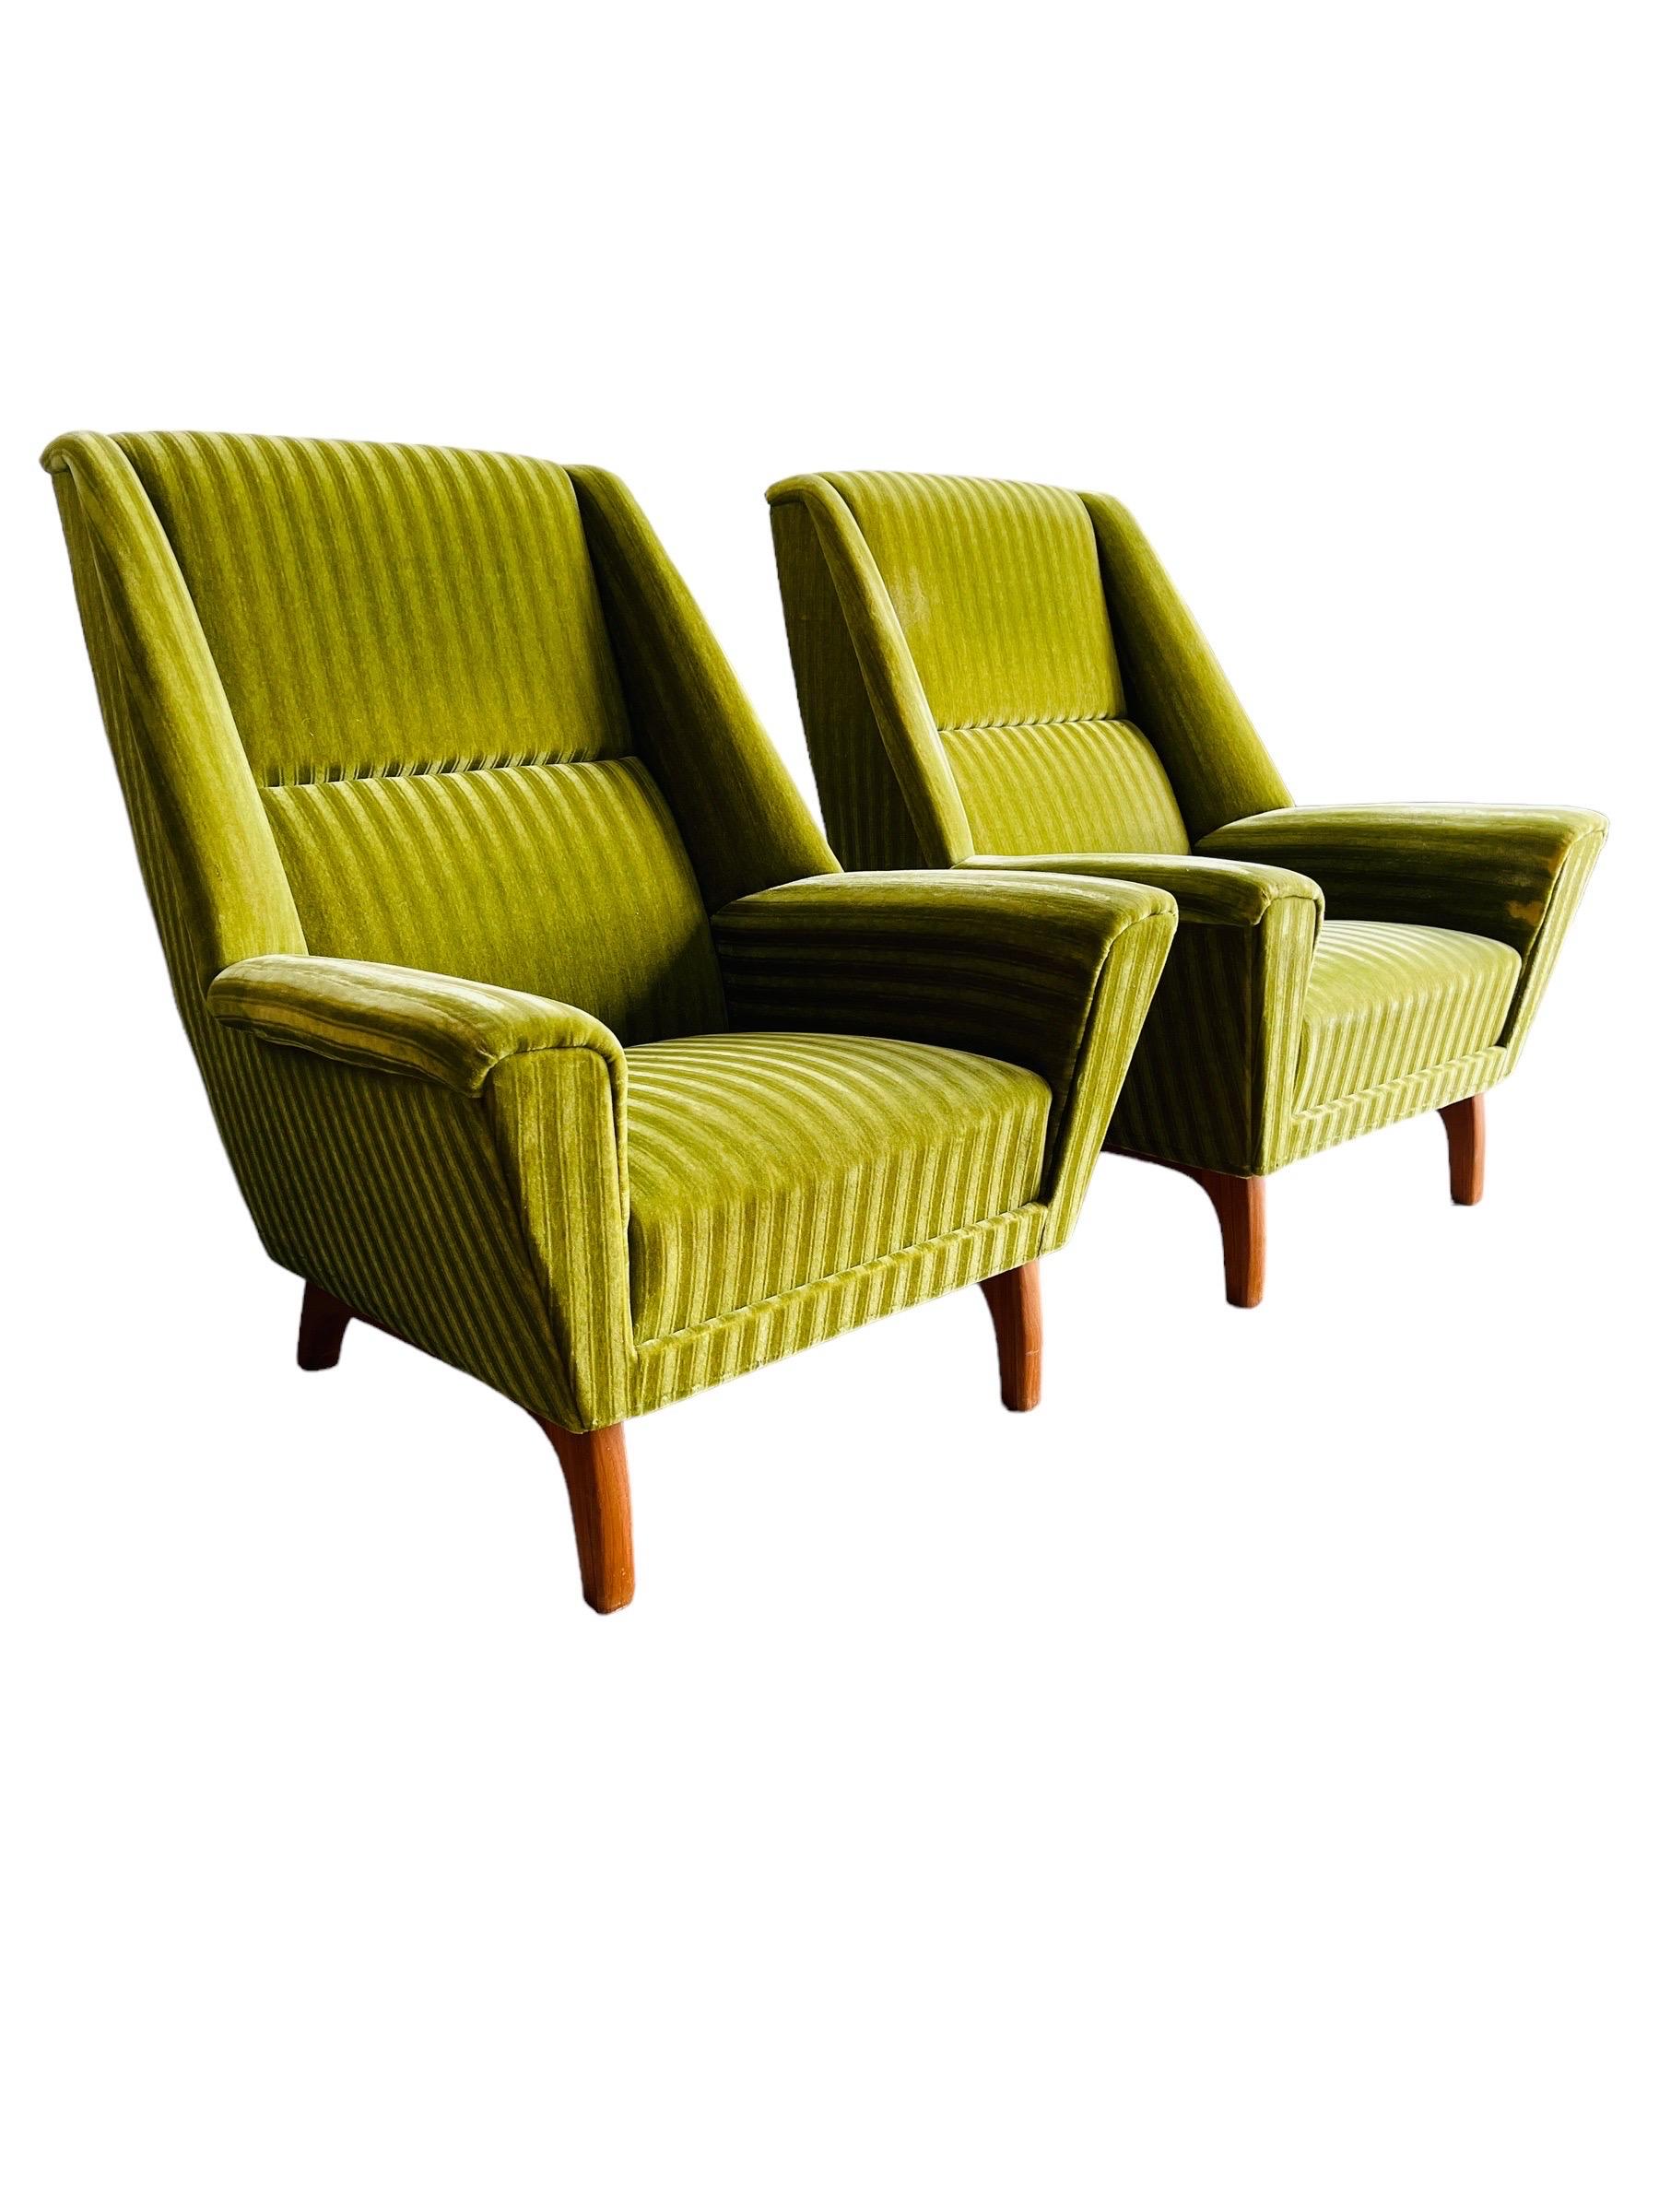 Discover the timeless elegance of these Danish modern lounge chairs, gracefully standing on warm teak legs. Their classic charm is accentuated by the vibrant green striated upholstery, which brings a pop of color and a touch of vintage flair to any